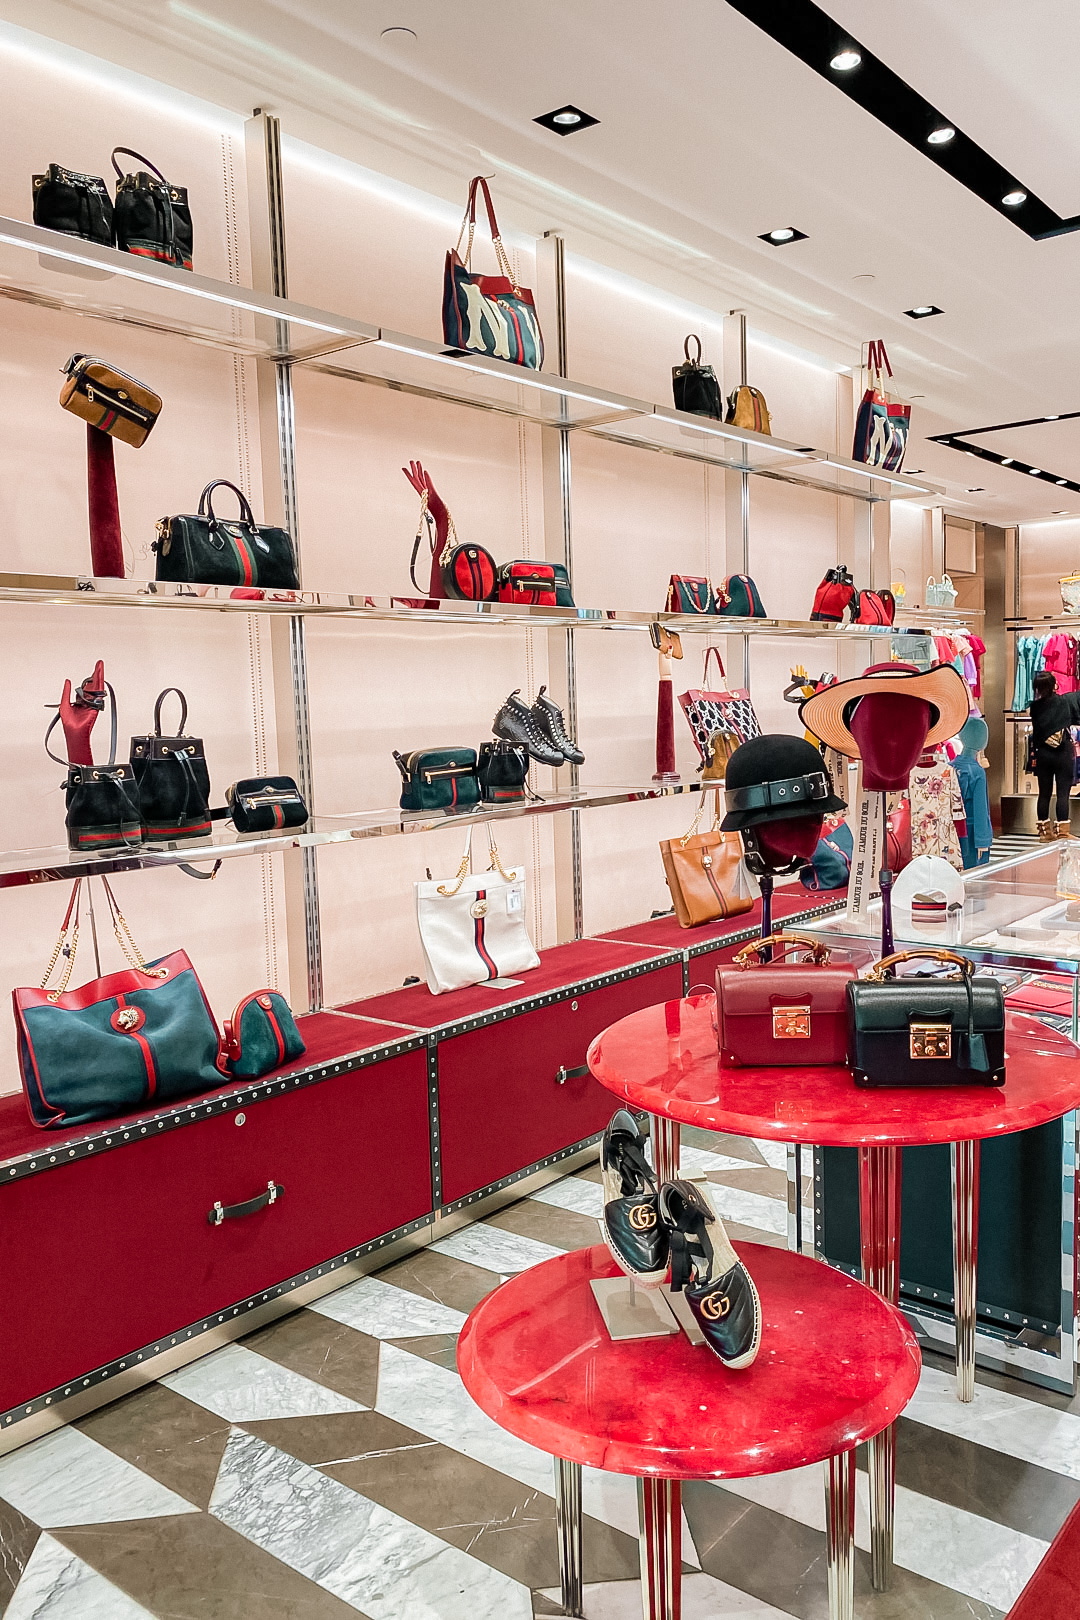 Gucci Outlet Live Event Photos (Nov 2021) - The Luxury Lowdown